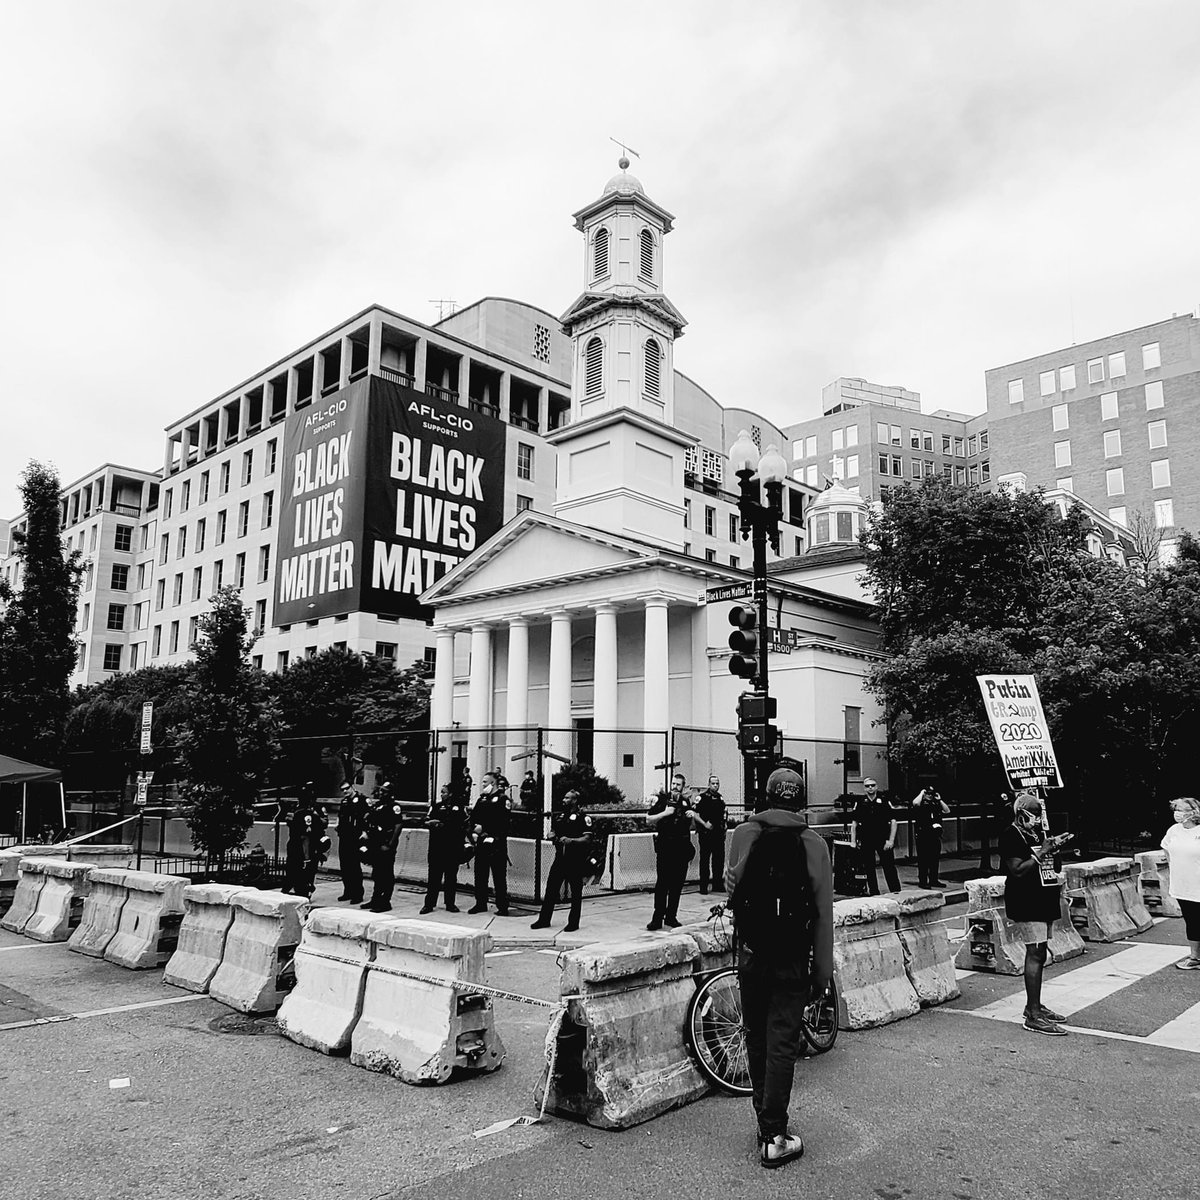 The now famous #stjohnschurch surrounded by #dcpolice at #BLMPlaza #DC #dcprotest #DCProtests #DCStatehood #dcphoto #dcphotography #photooftheday #photography #blackandwhitephotography #Lostboys_photos #streetphotography #streetphoto #DMV #blm